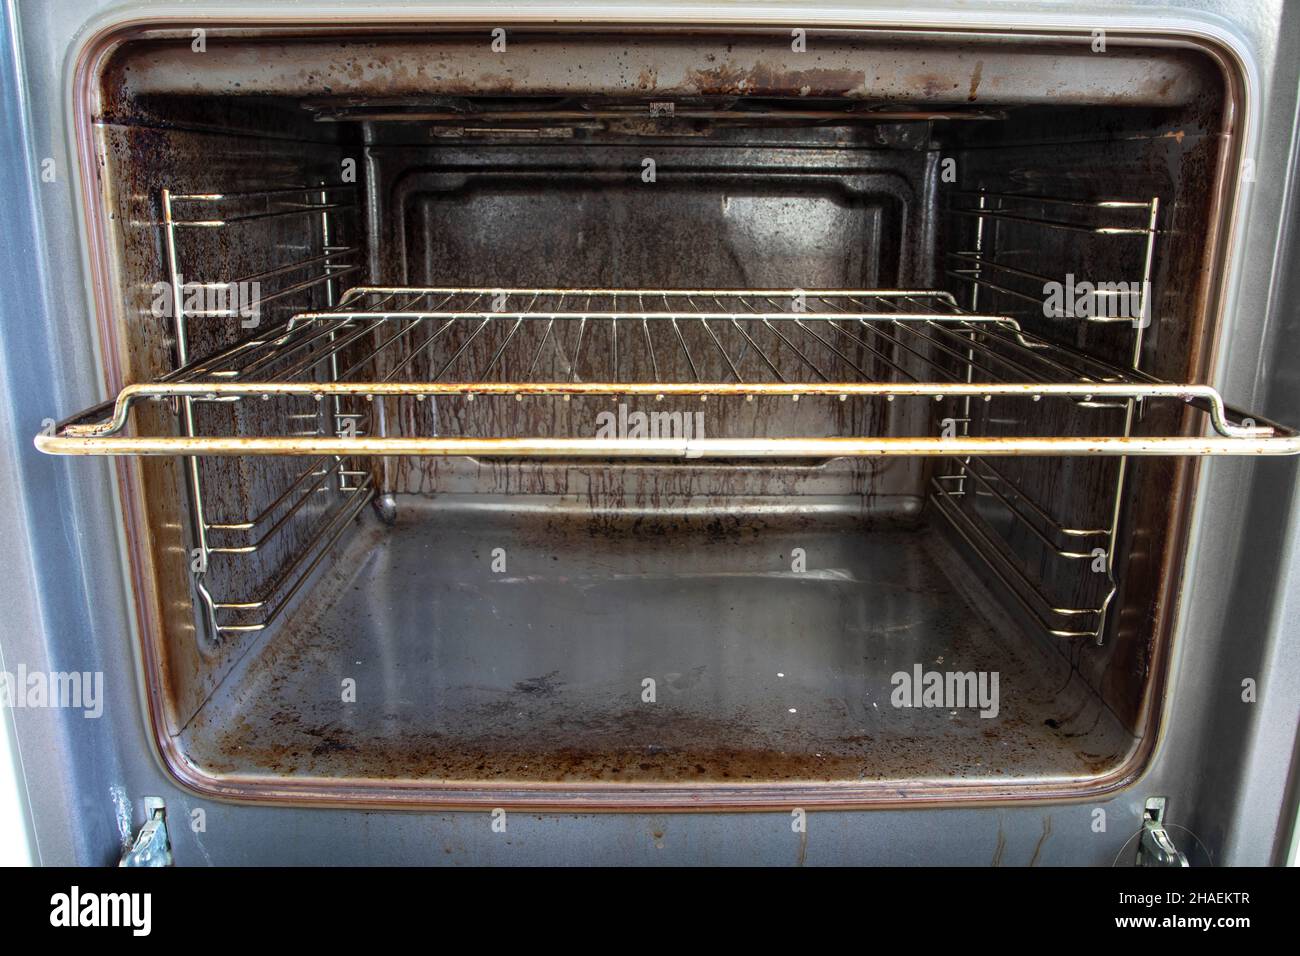 Very dirty oven. What needs to be done in the kitchen. Home imperfections. Motivation to clean. Stock Photo